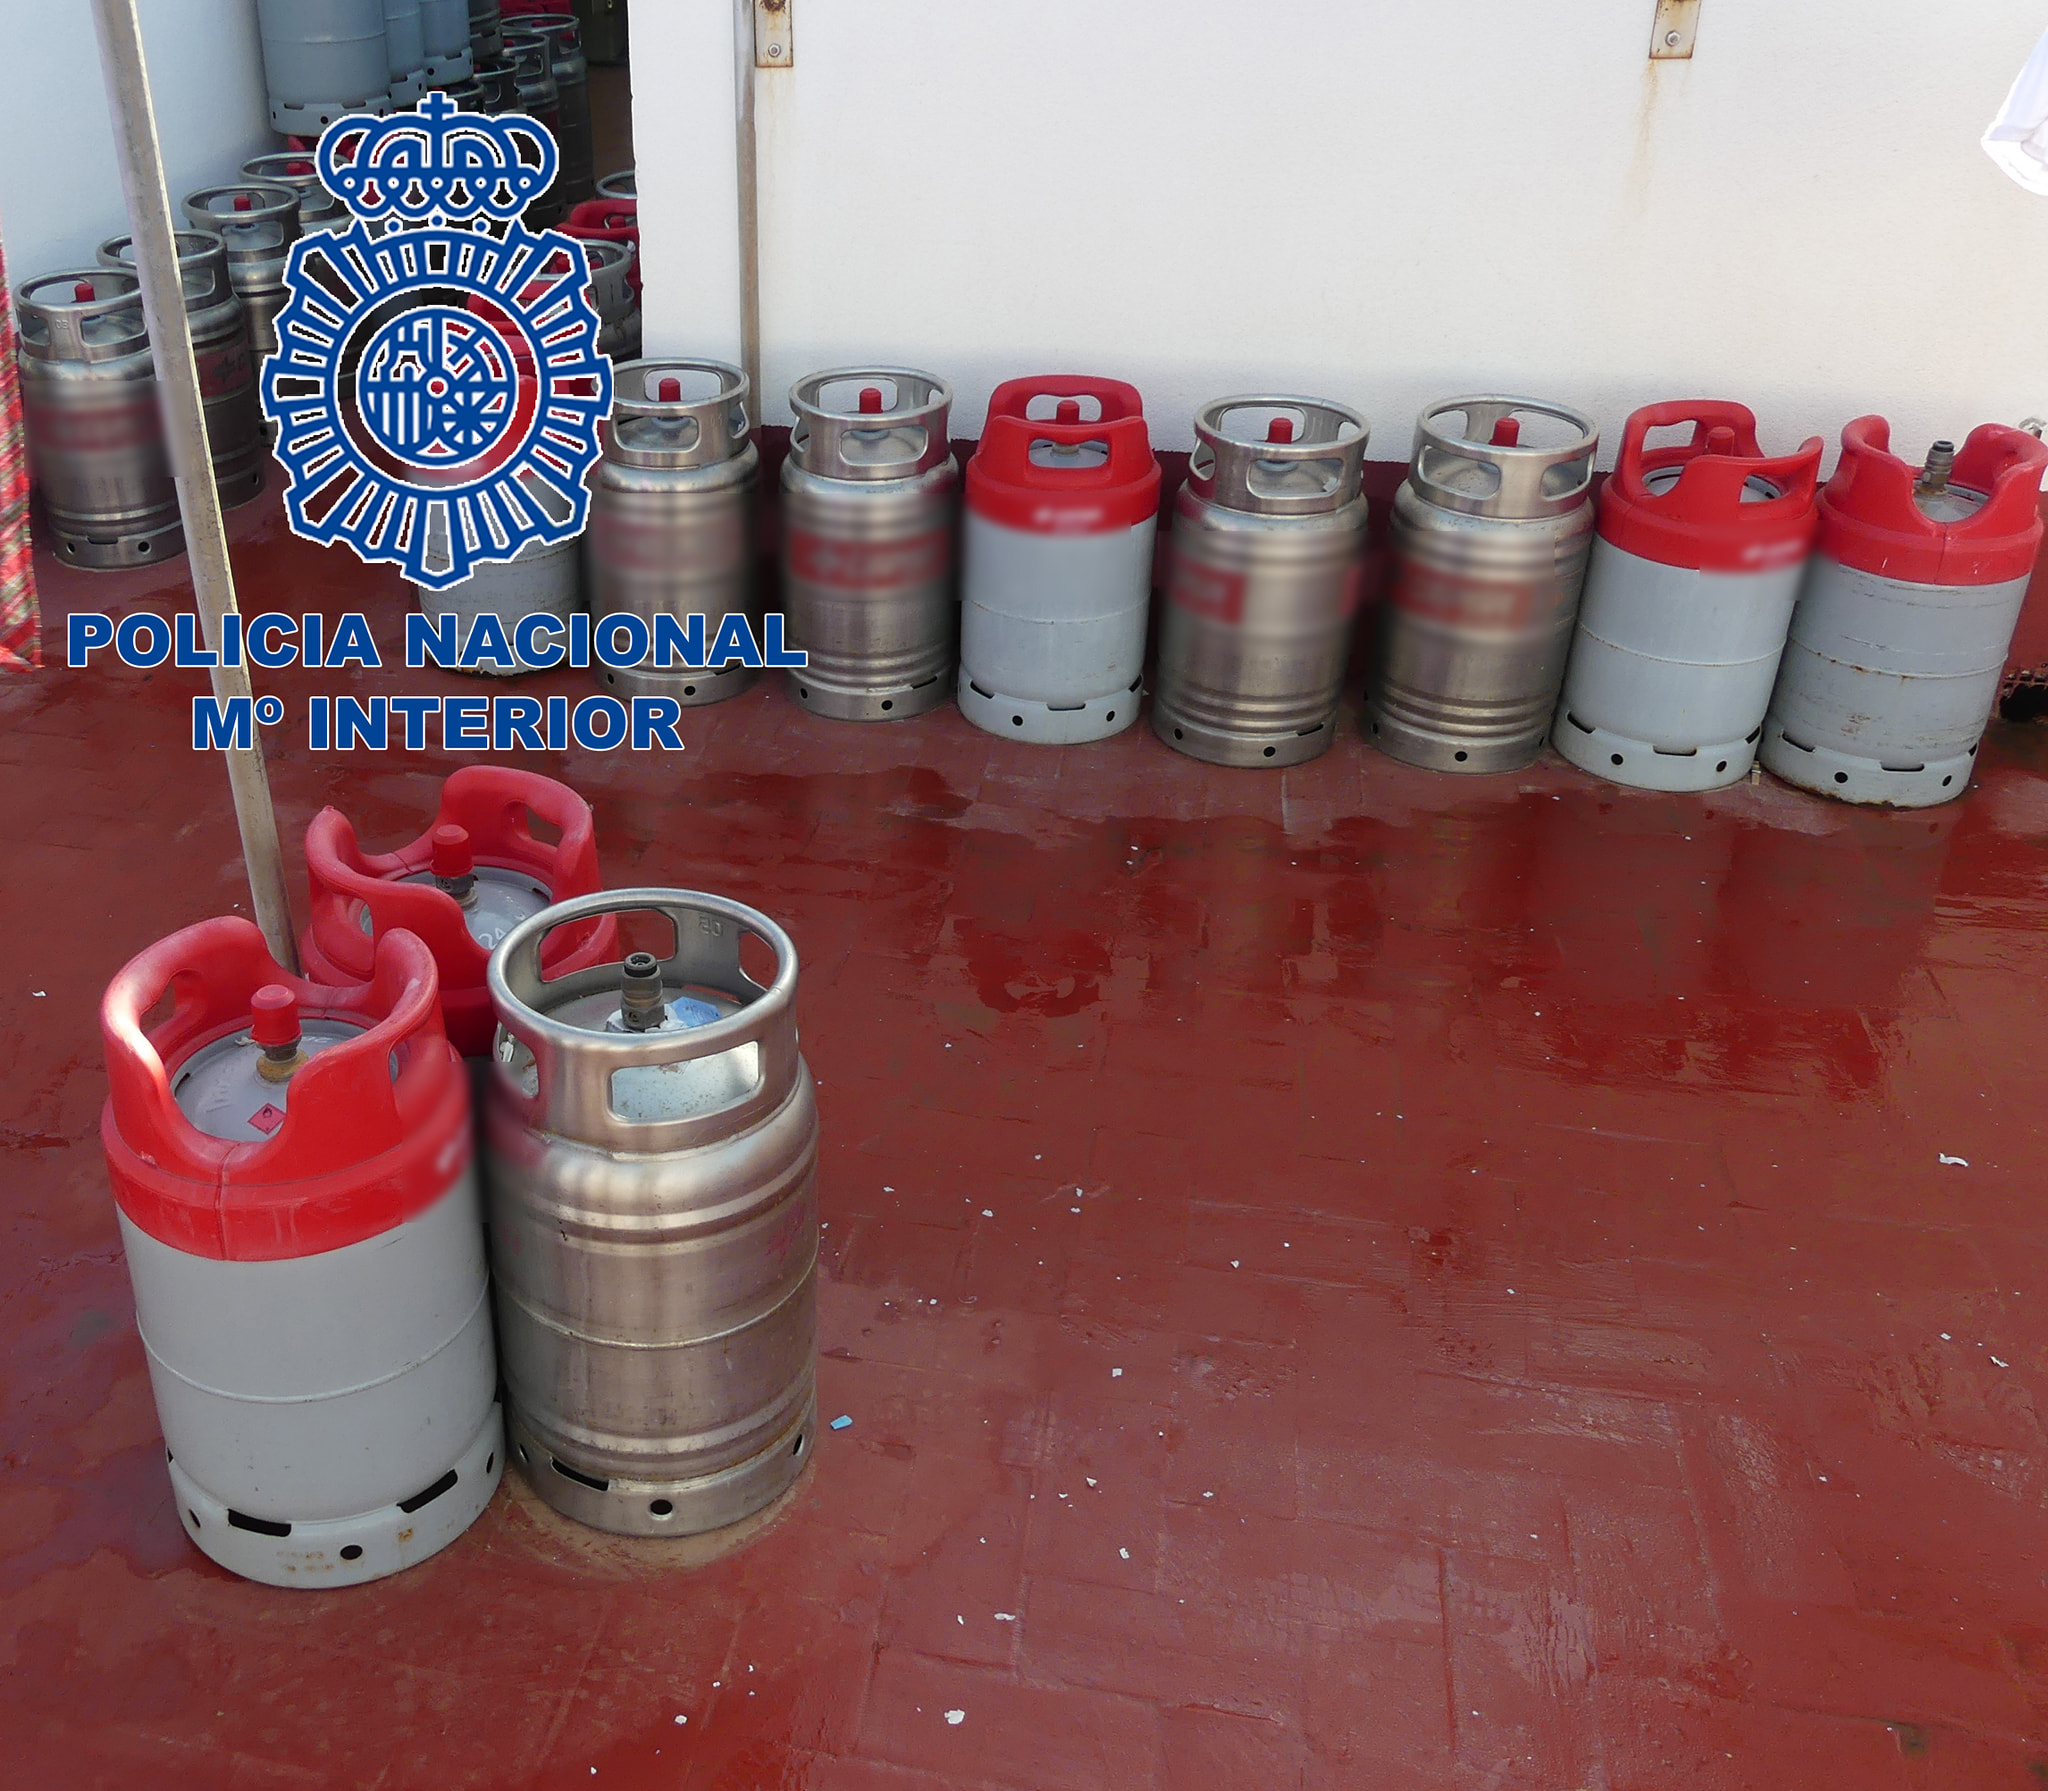 Benidorm Residents In Spain Feared An Explosion After Butano Gas Cylinders Were Left In Direct Sunlight On Apartment Patio